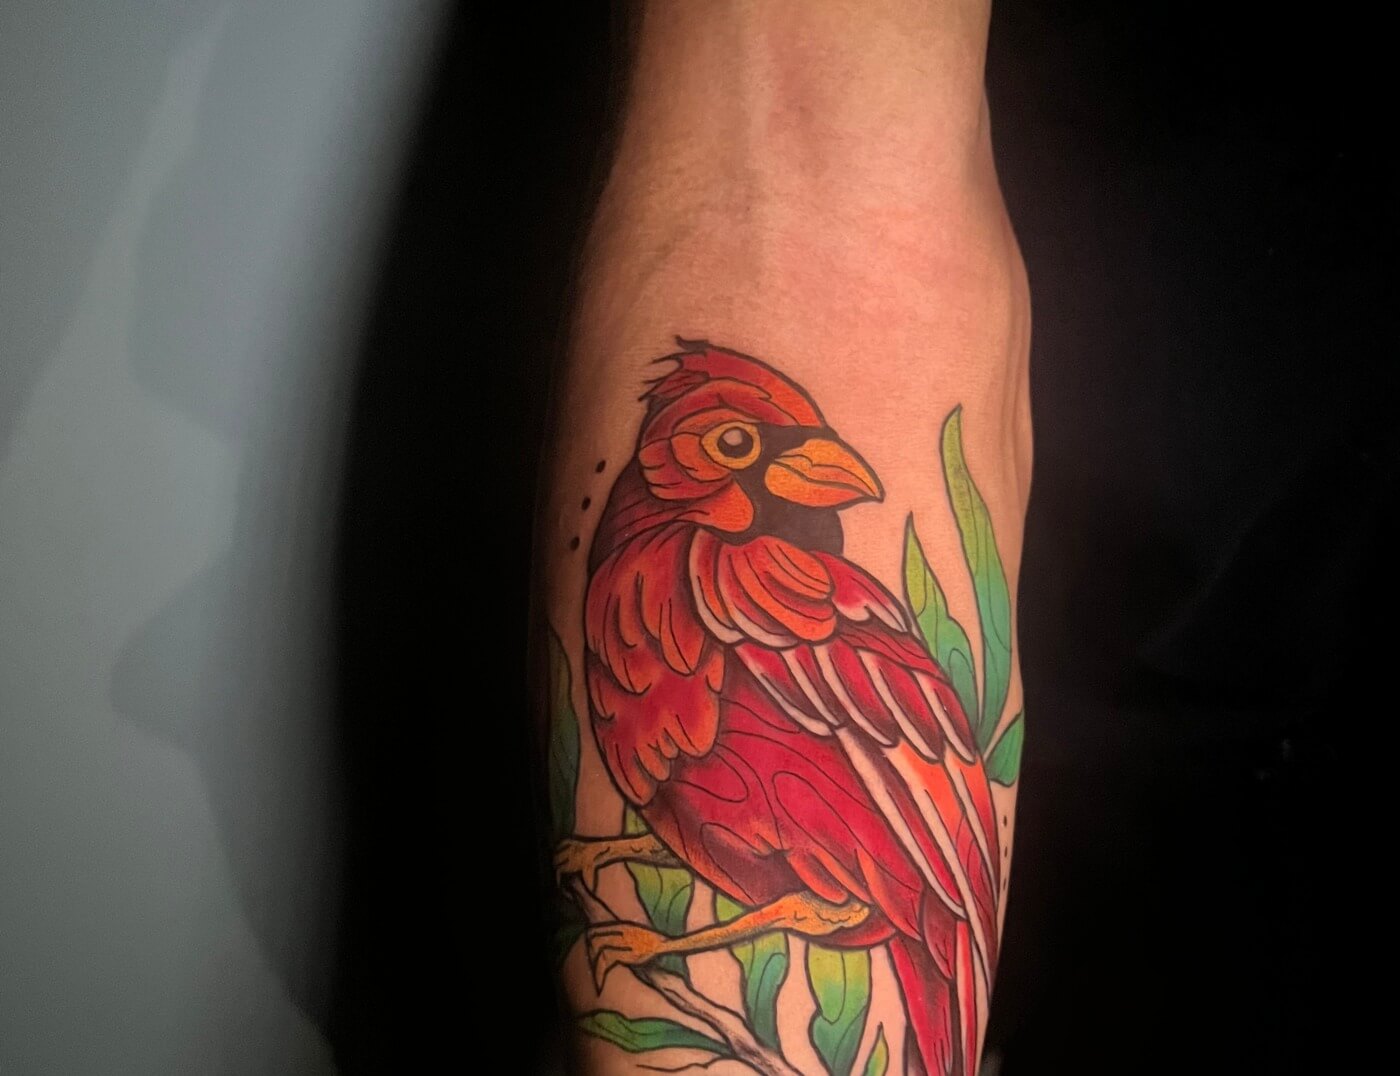 Red Cardinal On A Twig By Funk Tha World At Iron Palm Tattoos & Body Piercing In Atlanta, GA. We're open until 2AM most nights. Call 404-973-7828 or stop by for a free consultation.